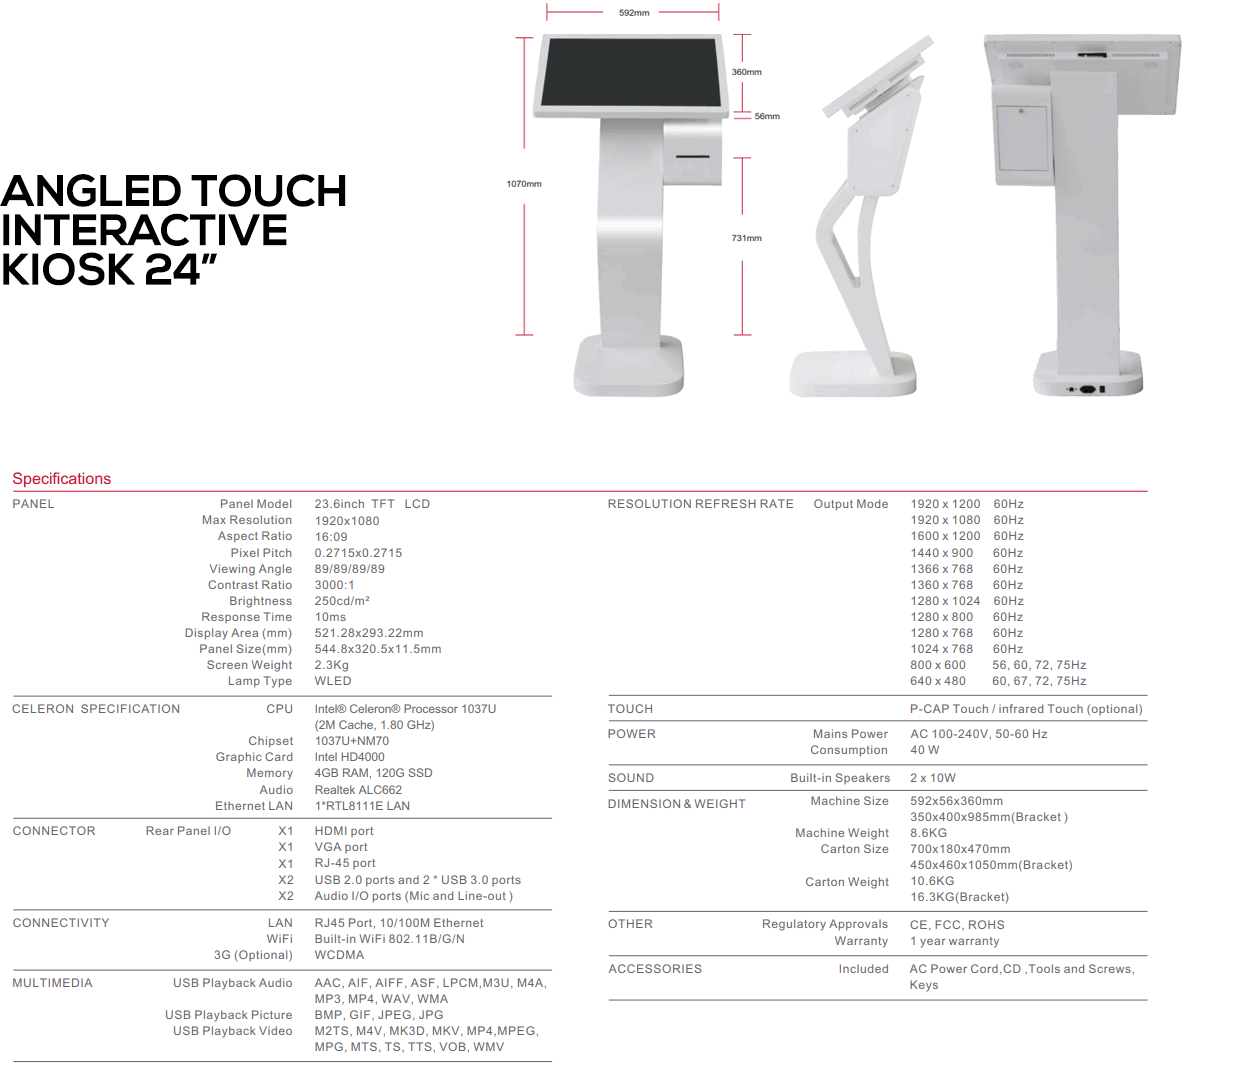 ANGLED TOUCH 24 specs